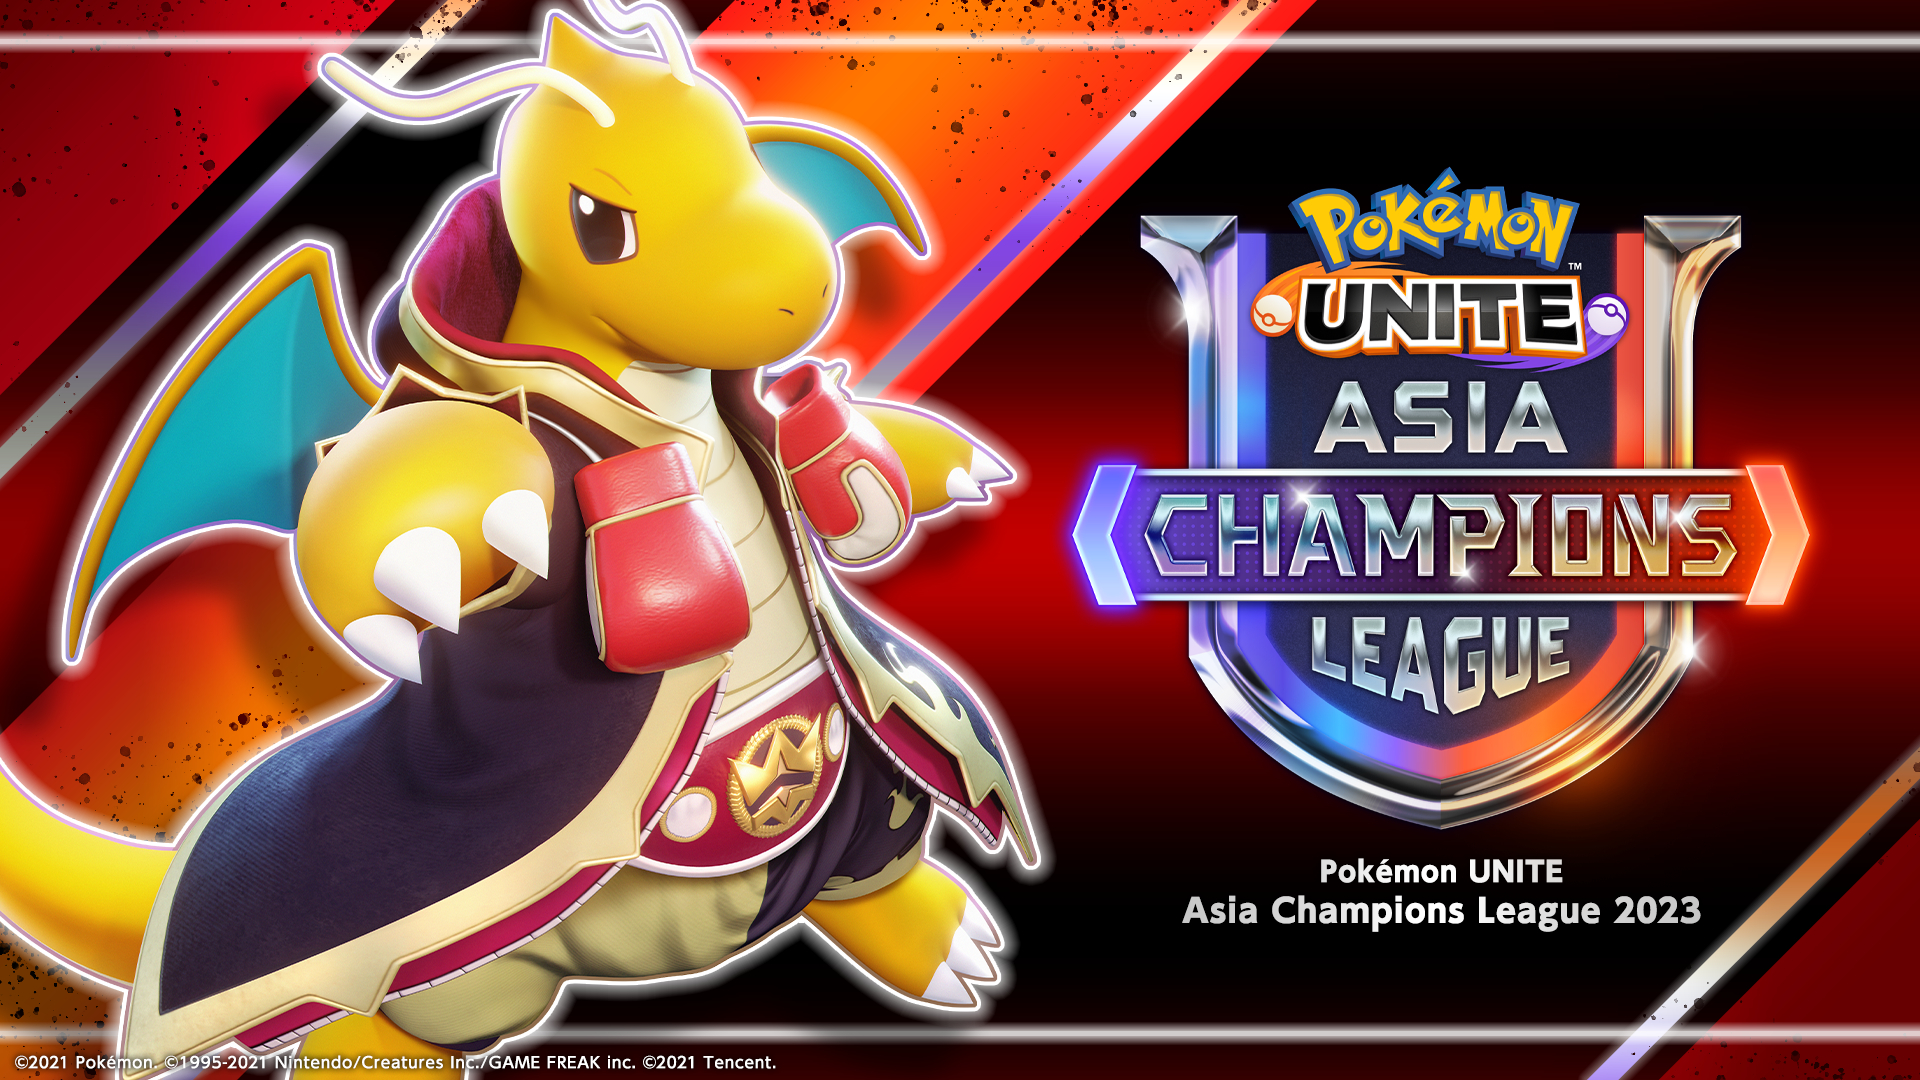 Pokémon UNITE Asia Champions League 2023 Playoffs In KL This Weekend